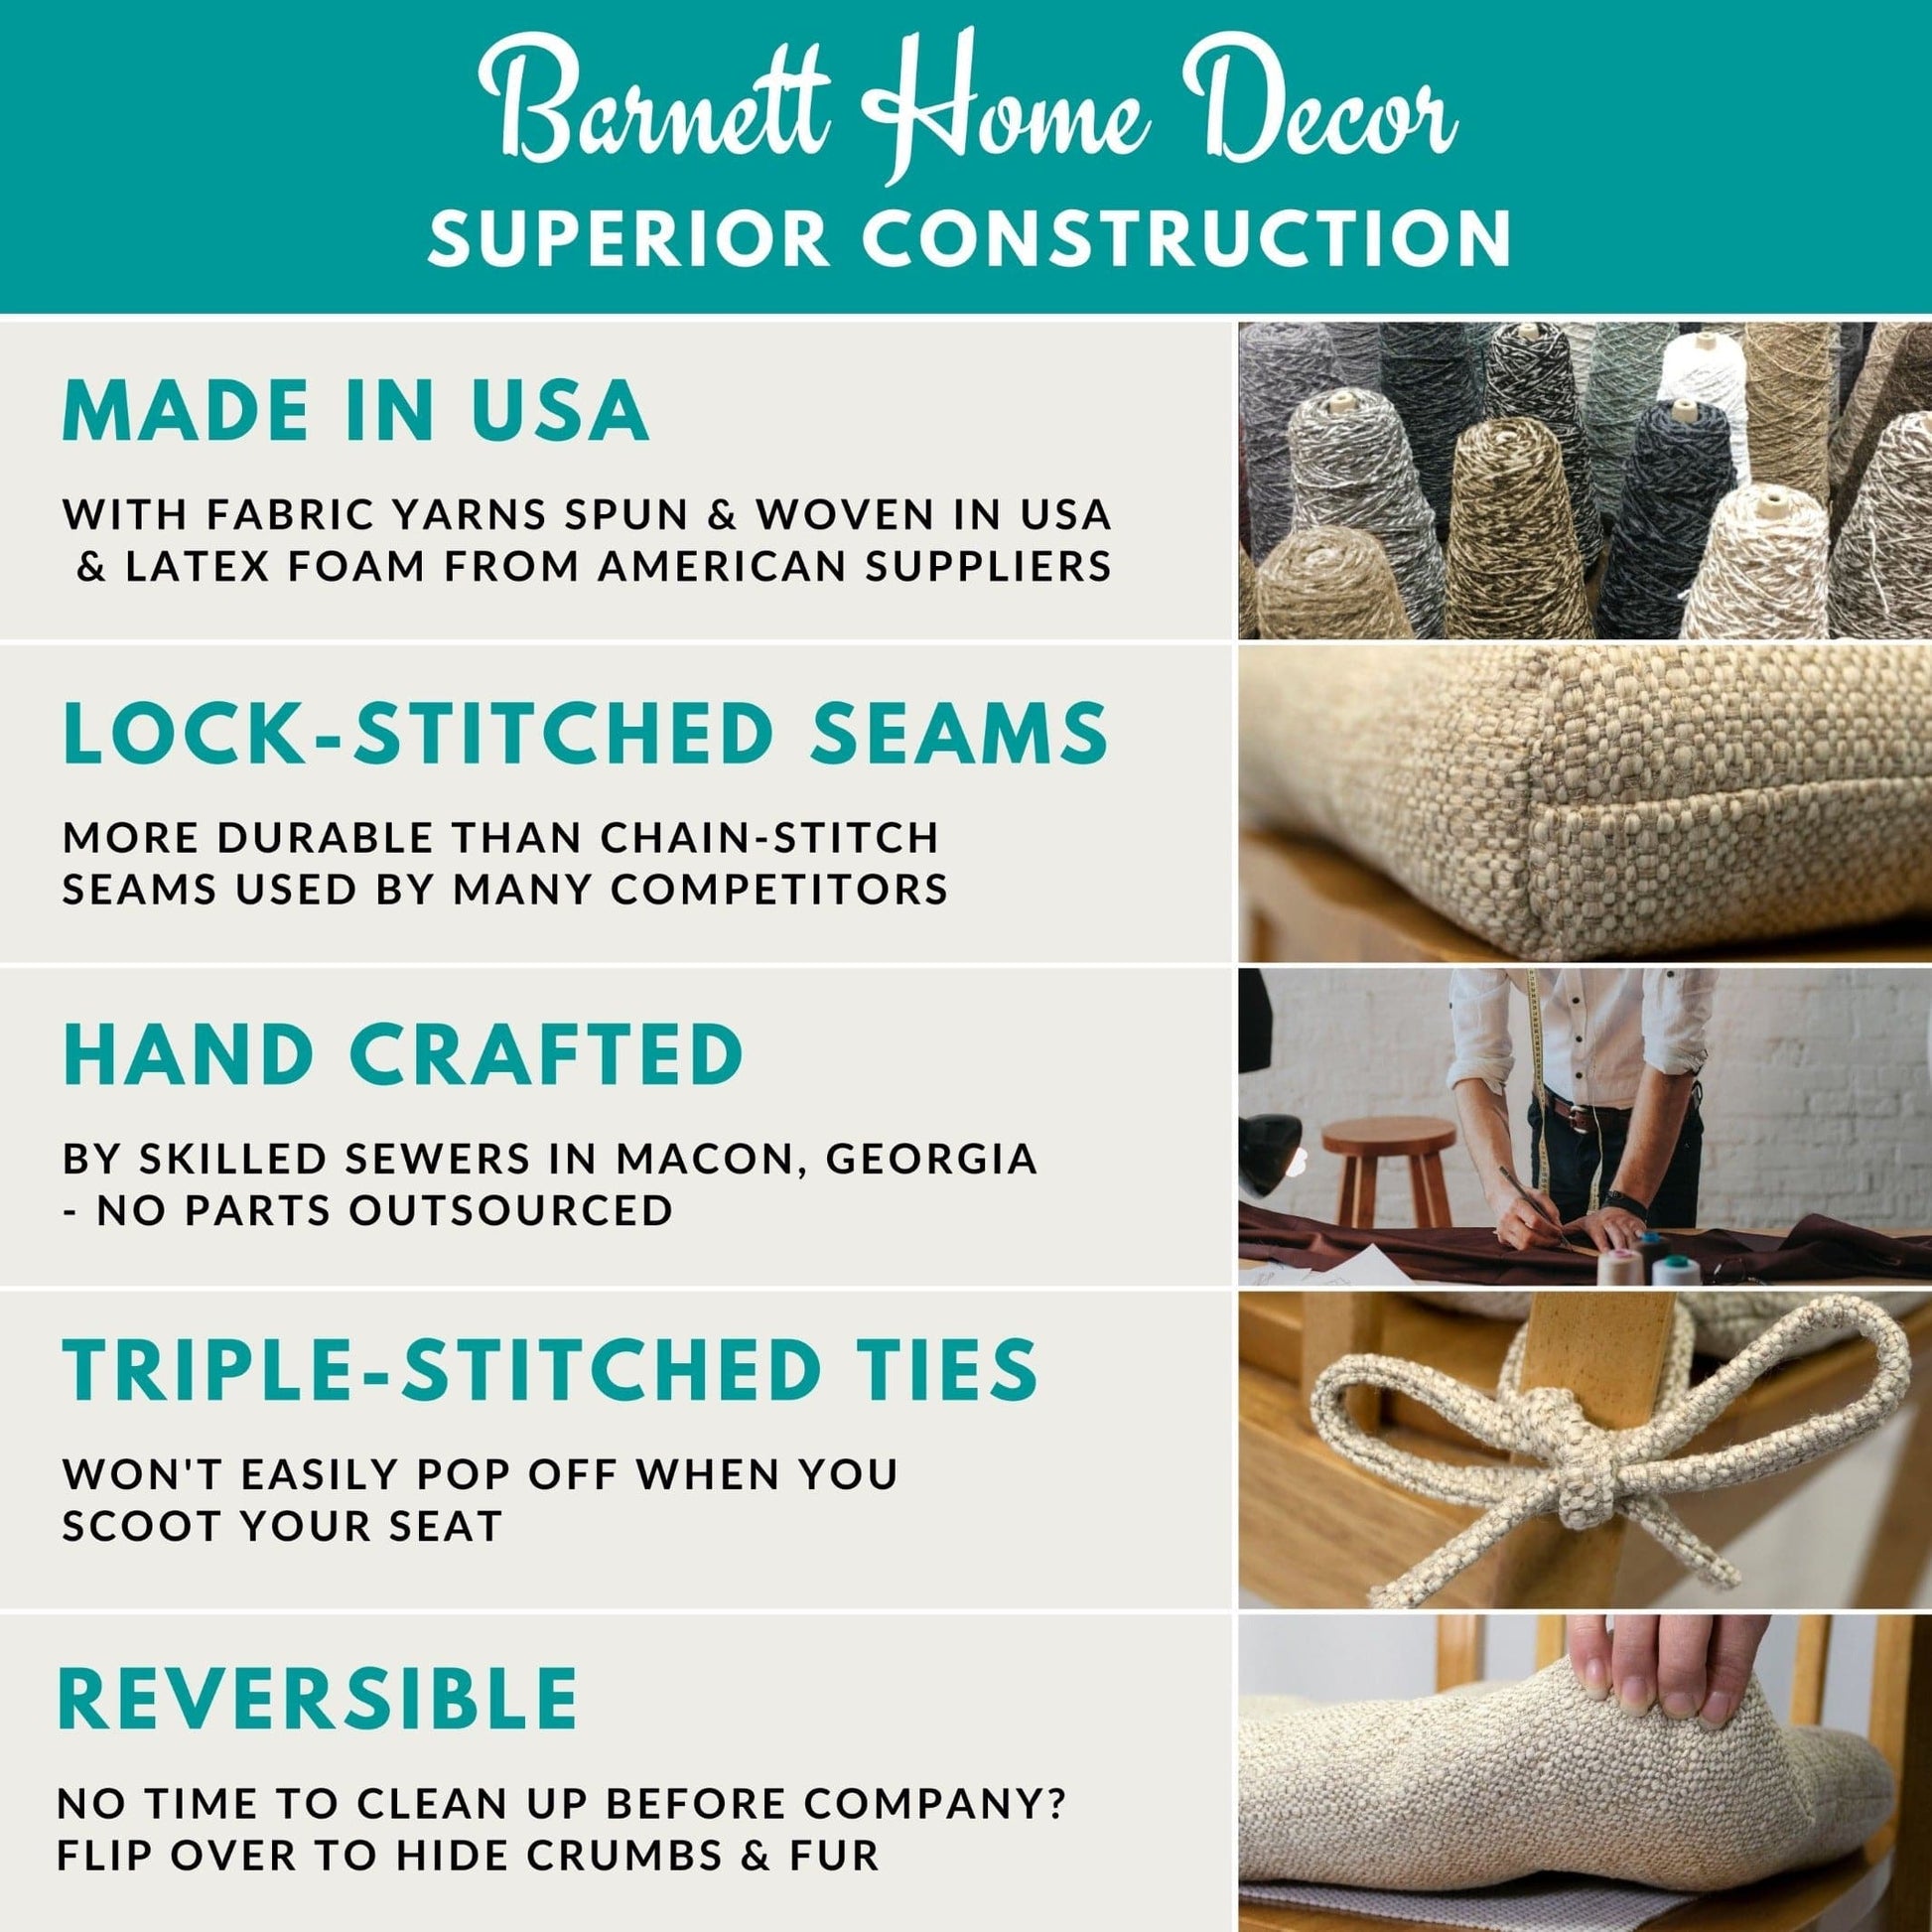 Barnett Home Decor Superior Construction Made in USA, Lock-Stitched Seams, Hand Crafted, Triple Stitched Ties, Reversible